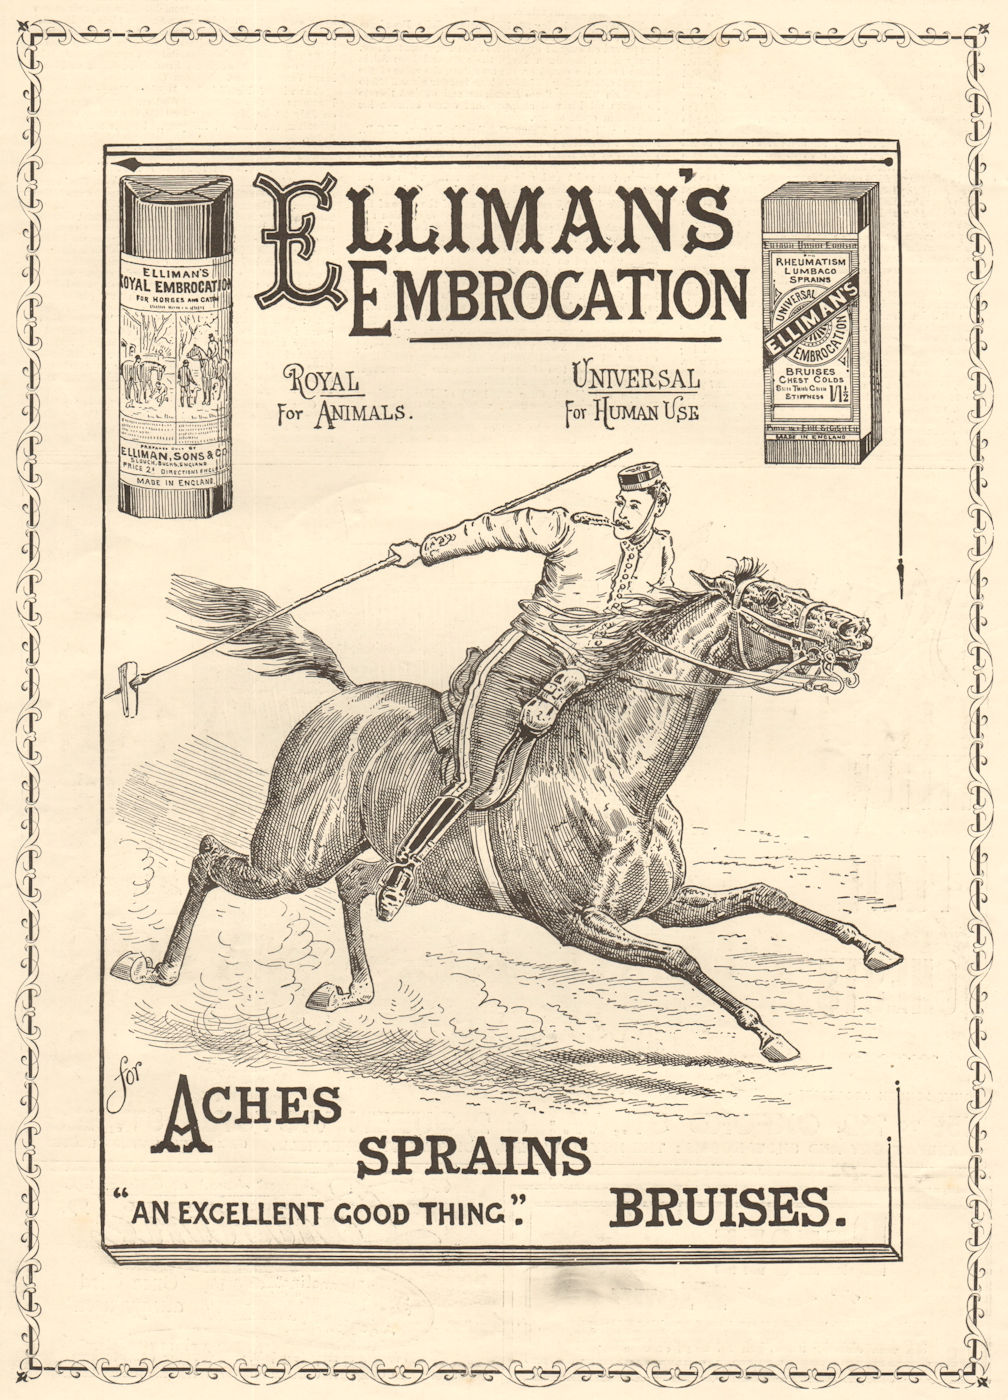 Elliman's embrocation. "An excellent good thing". ADVERT. Lancer Horse 1896